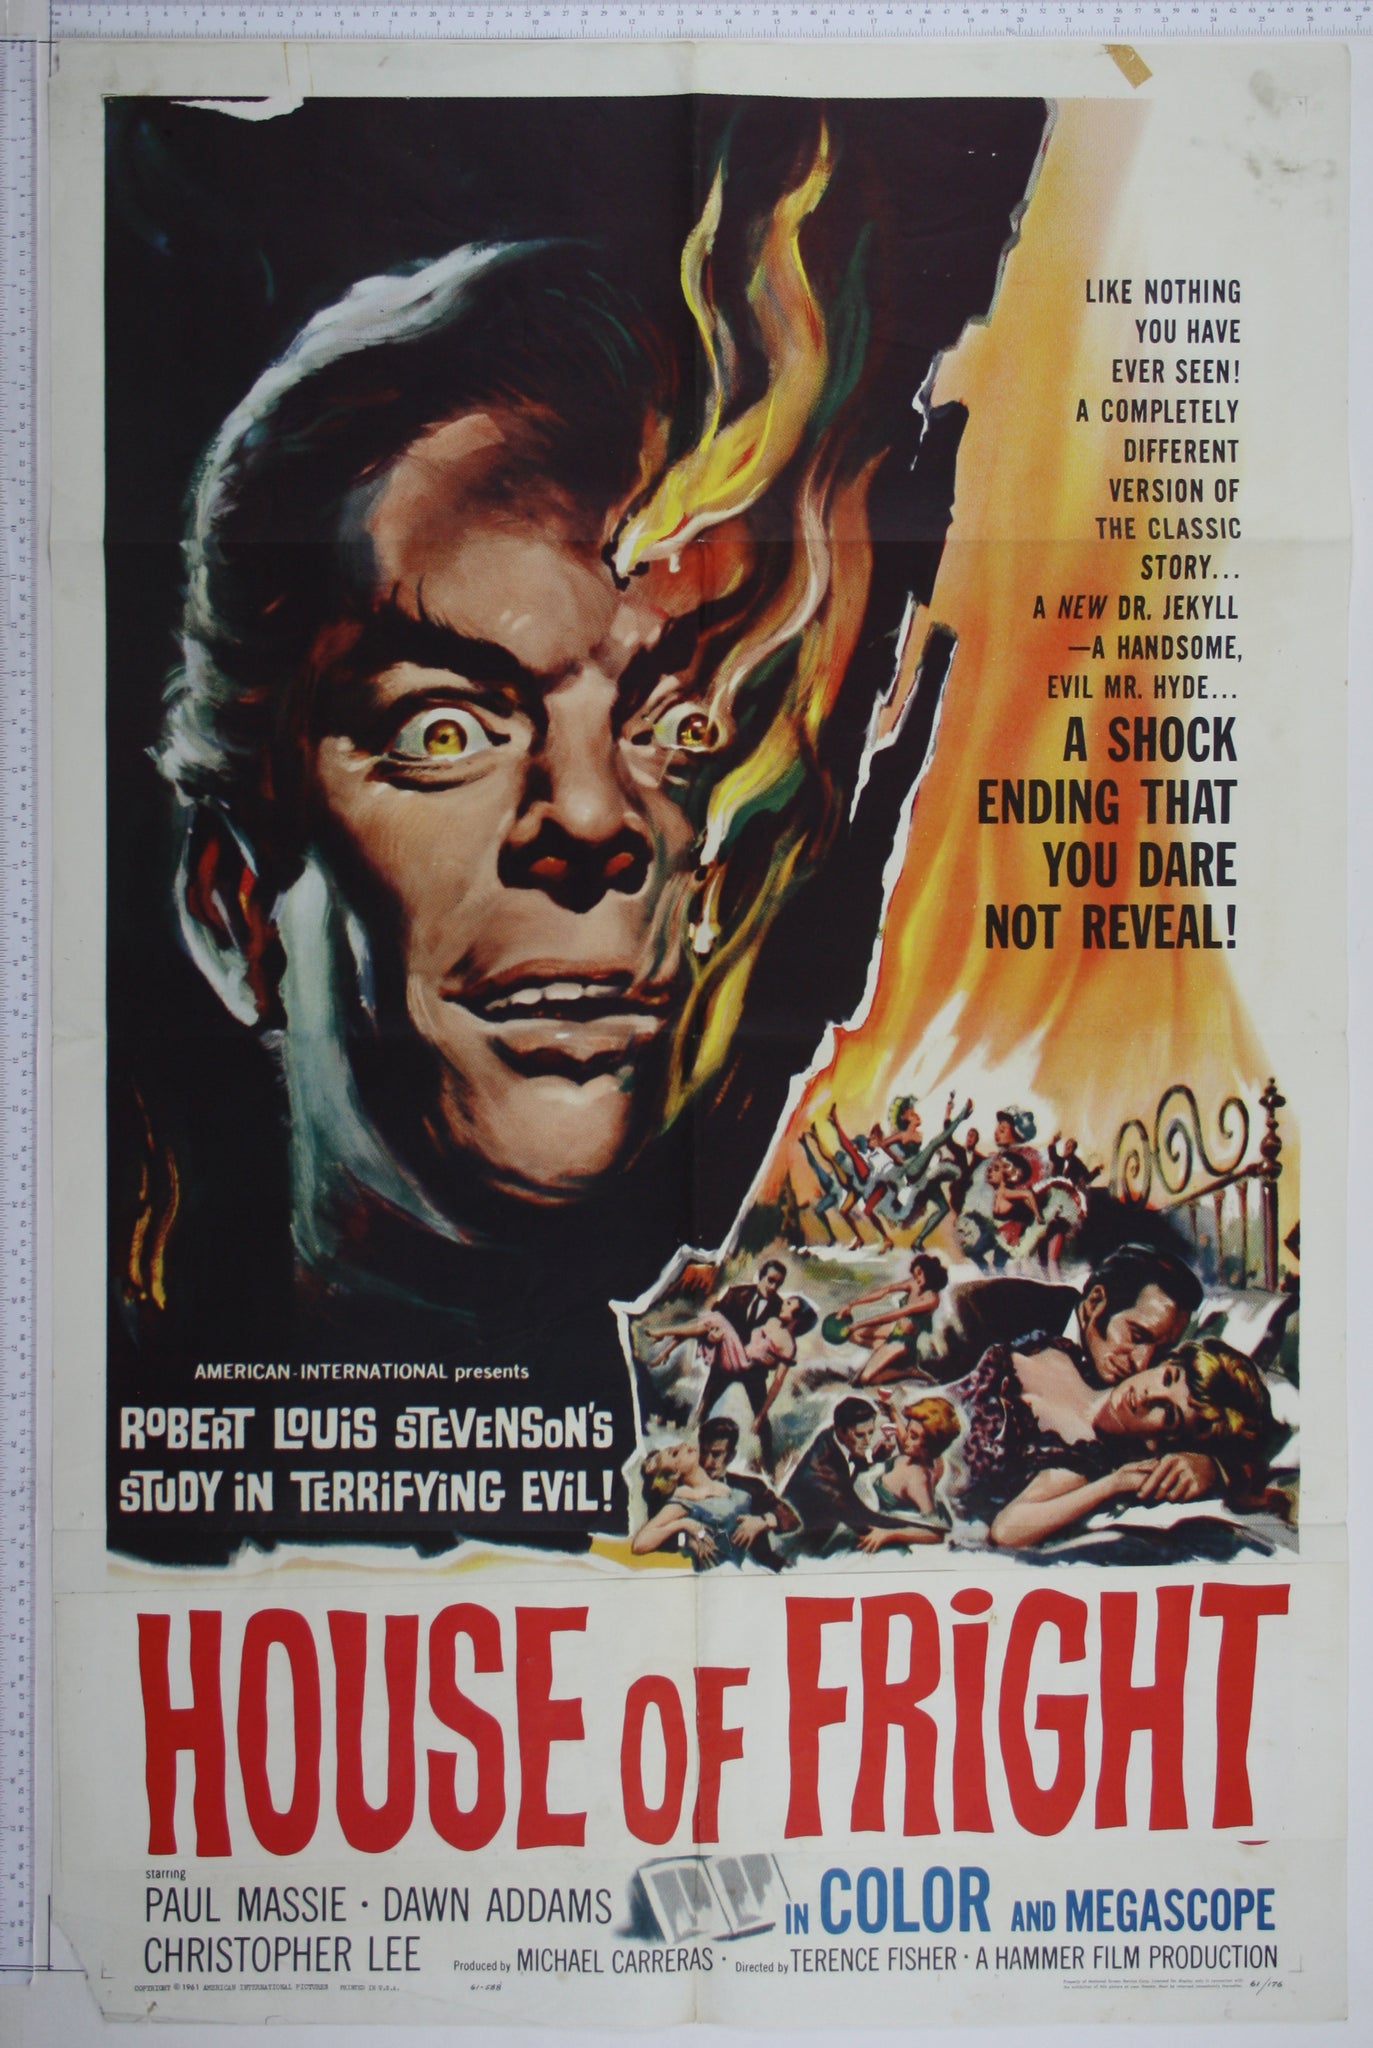 House of Fright - Hyde's face bursts into flames, below, scenes of dancing and lechery. 